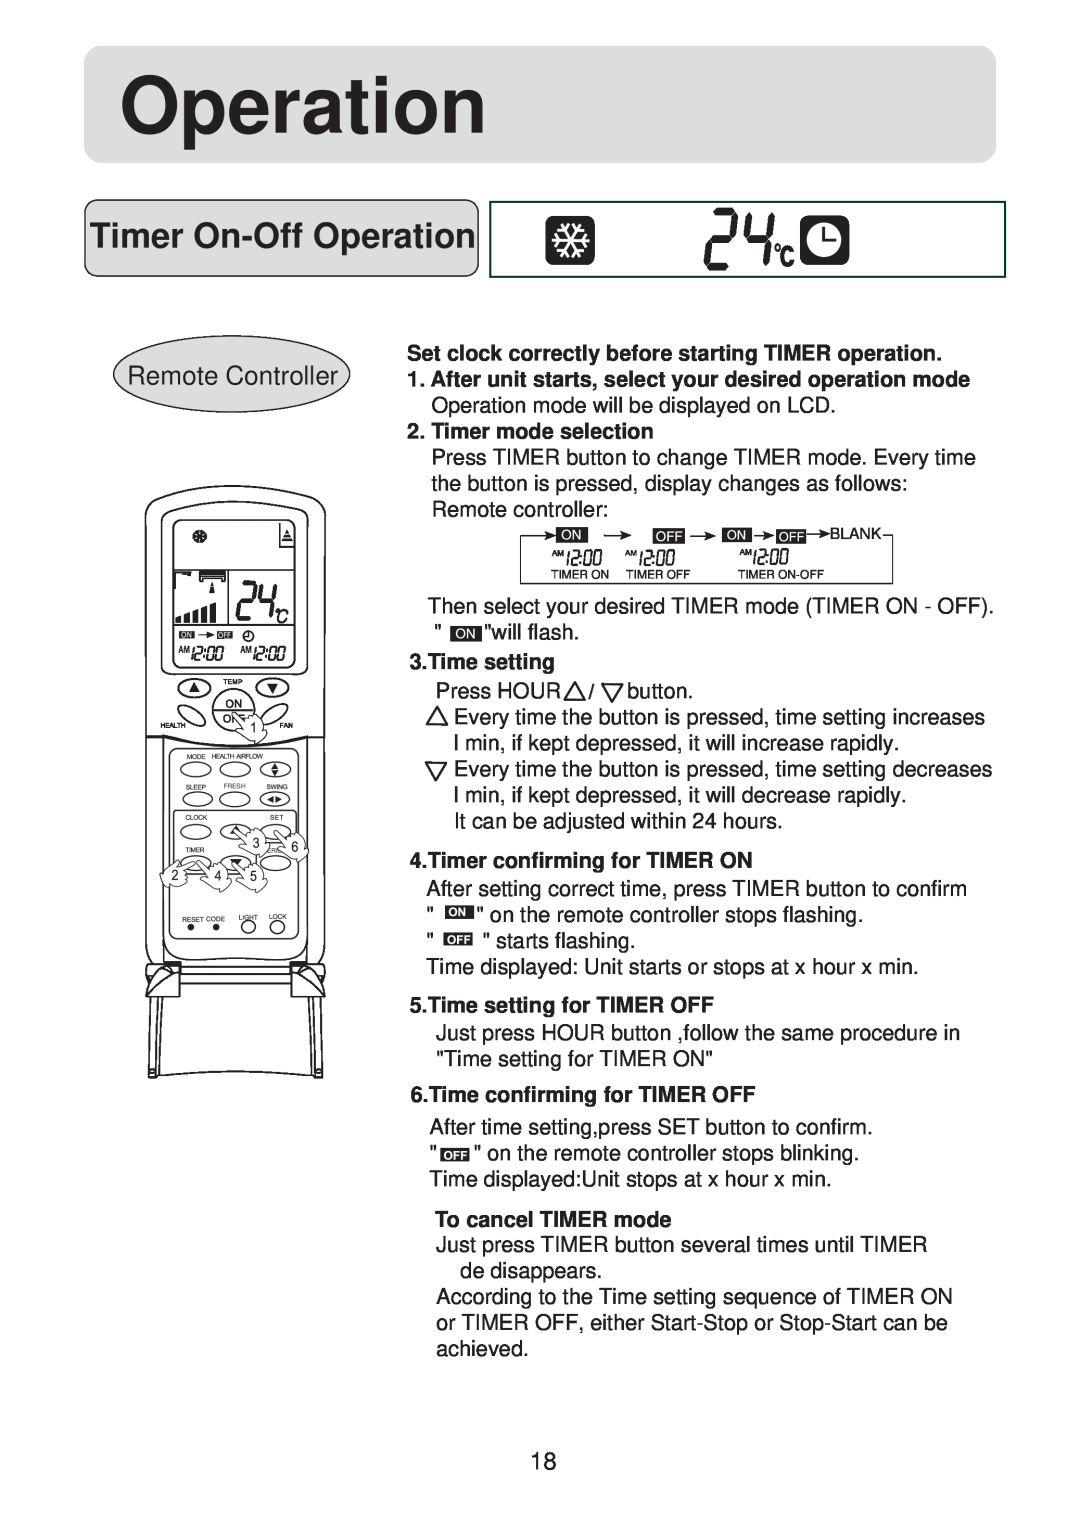 Haier HSU-12HV03/R2(SDB) Timer On-Off Operation, Remote Controller, Set clock correctly before starting TIMER operation 